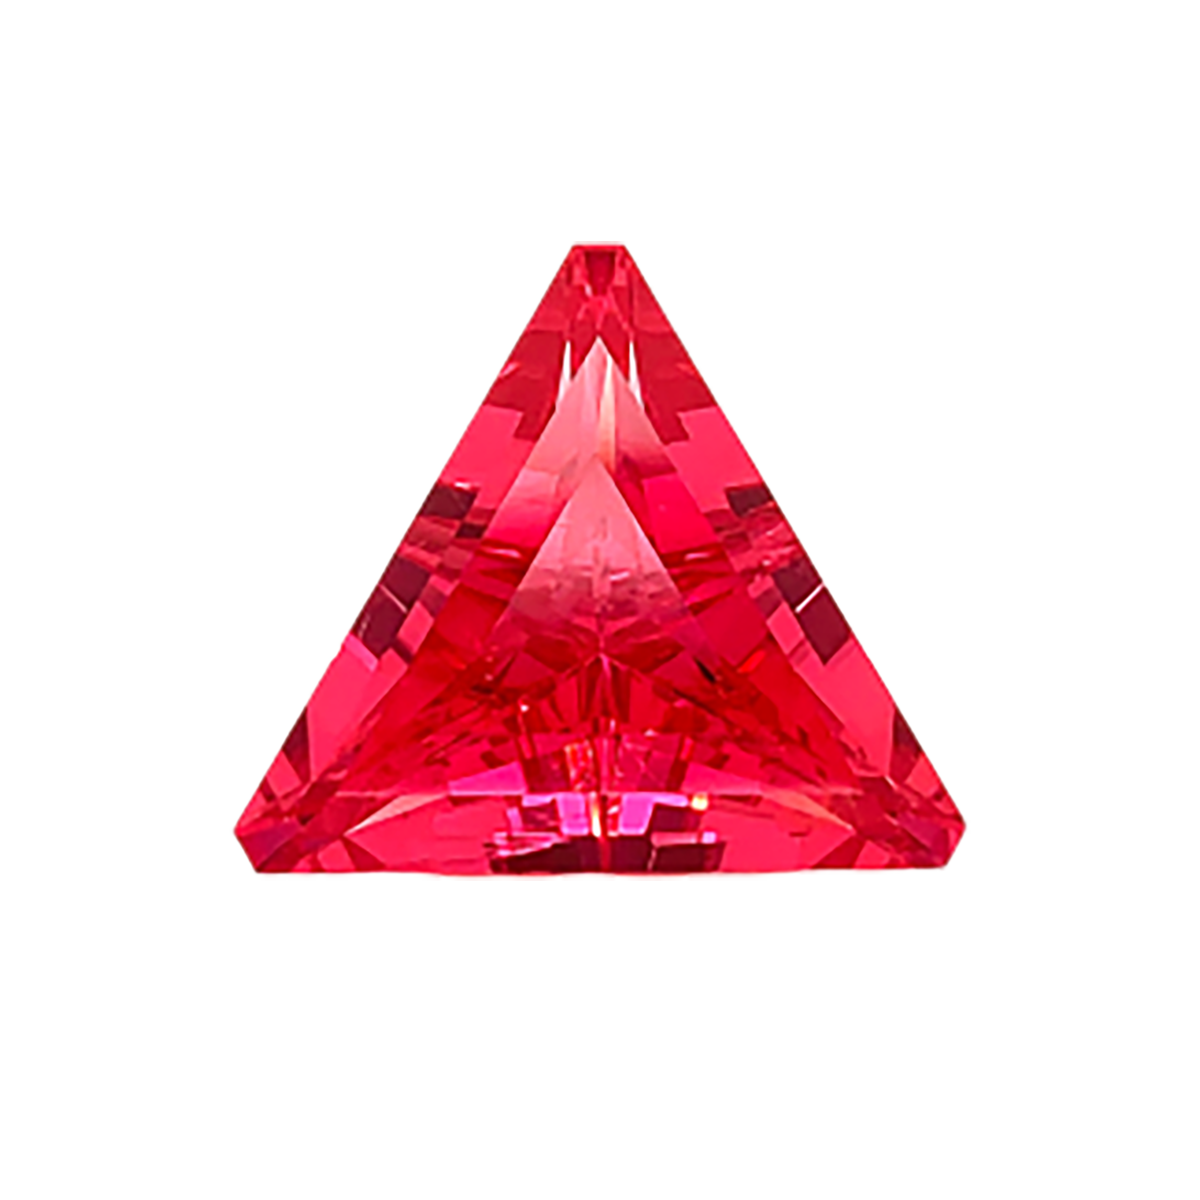 Stone Spinel Free Transparent Image HQ PNG Image